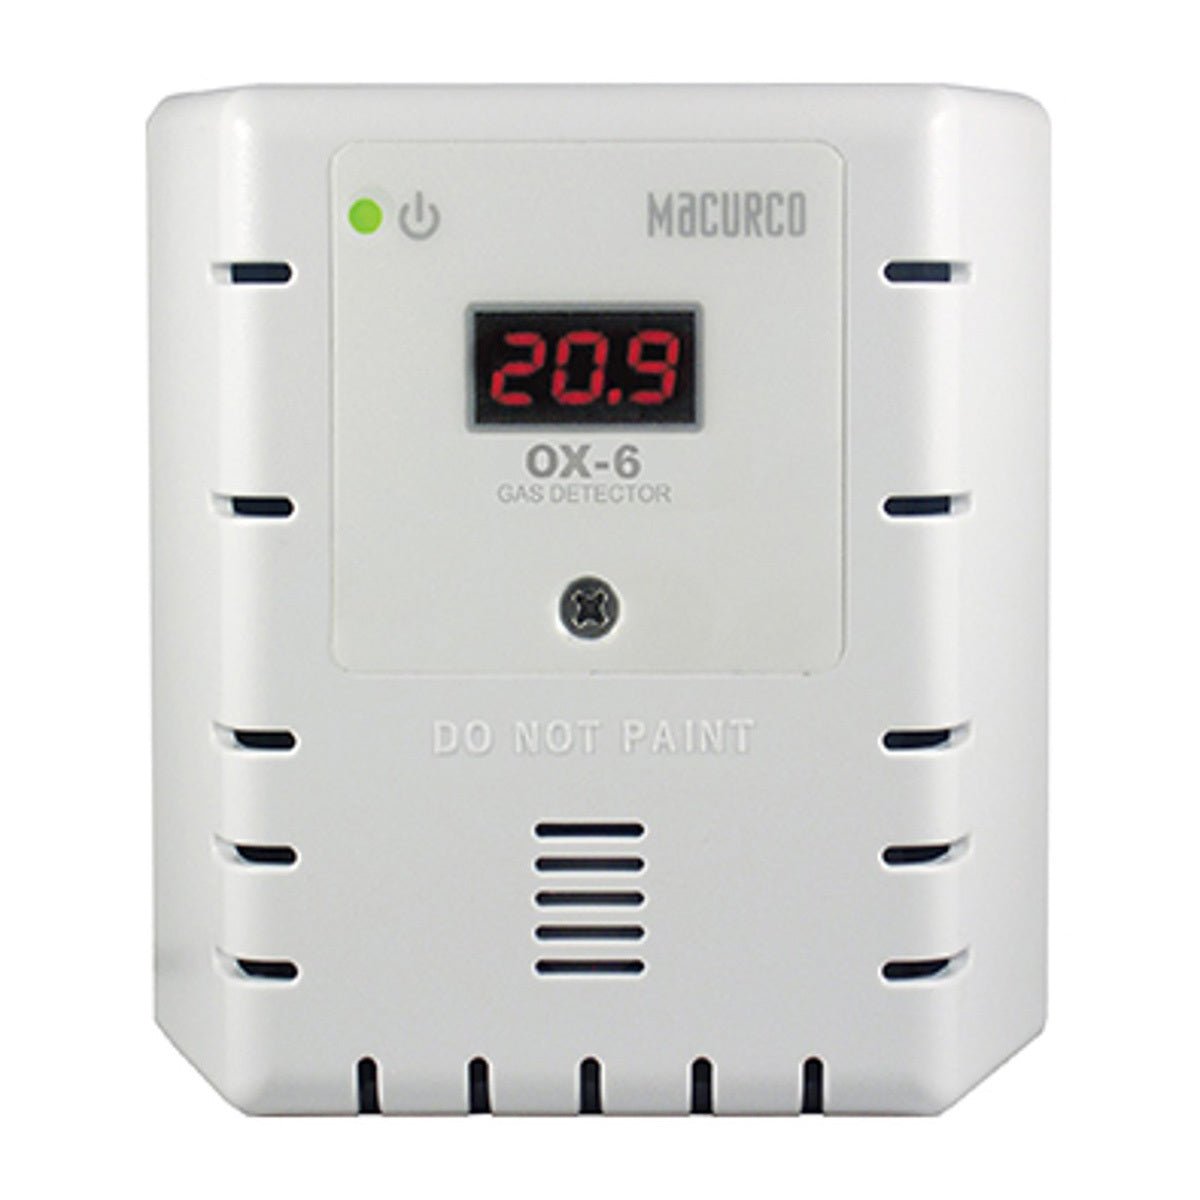 Macurco™ Gas Detection OX-6 WHITE Fixed Oxygen Detector-eSafety Supplies, Inc